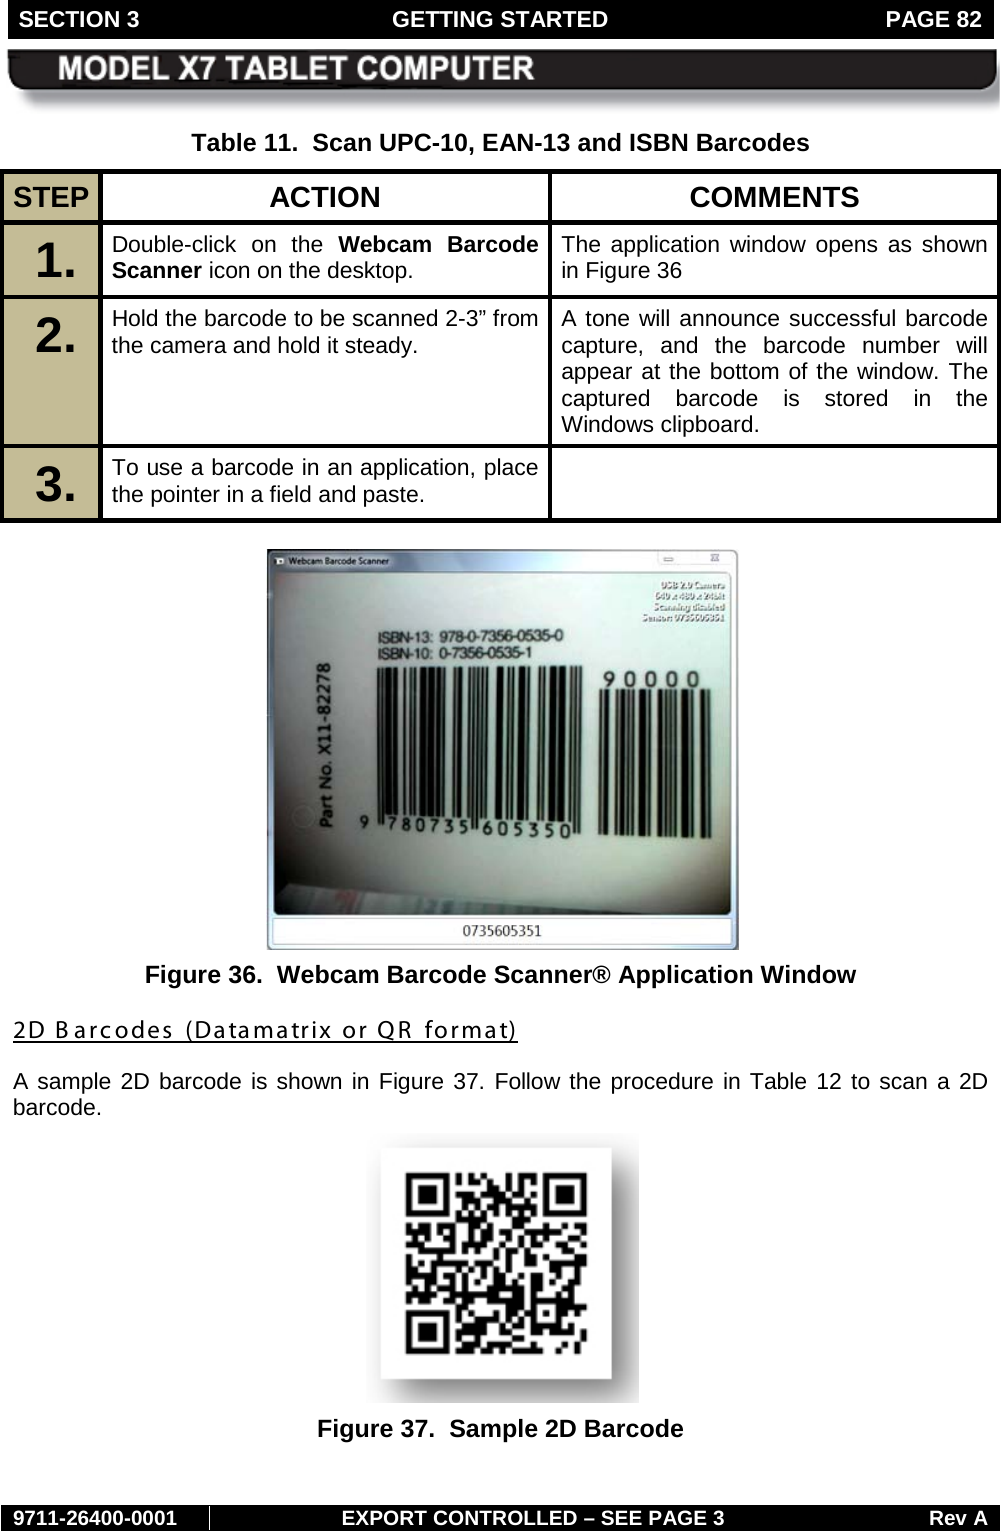 SECTION 3 GETTING STARTED  PAGE 82        9711-26400-0001 EXPORT CONTROLLED – SEE PAGE 3 Rev A Table 11.  Scan UPC-10, EAN-13 and ISBN Barcodes STEP  ACTION COMMENTS 1.  Double-click on the Webcam Barcode Scanner icon on the desktop.  The application window opens as shown in Figure 36 2.  Hold the barcode to be scanned 2-3” from the camera and hold it steady.  A tone will announce successful barcode capture, and the barcode number will appear at the bottom of the window. The captured barcode is stored in the Windows clipboard. 3.  To use a barcode in an application, place the pointer in a field and paste.    Figure 36.  Webcam Barcode Scanner® Application Window 2D B arcodes  (Datamatrix or QR  format) A sample 2D barcode is shown in Figure 37. Follow the procedure in Table 12 to scan a 2D barcode.  Figure 37.  Sample 2D Barcode   